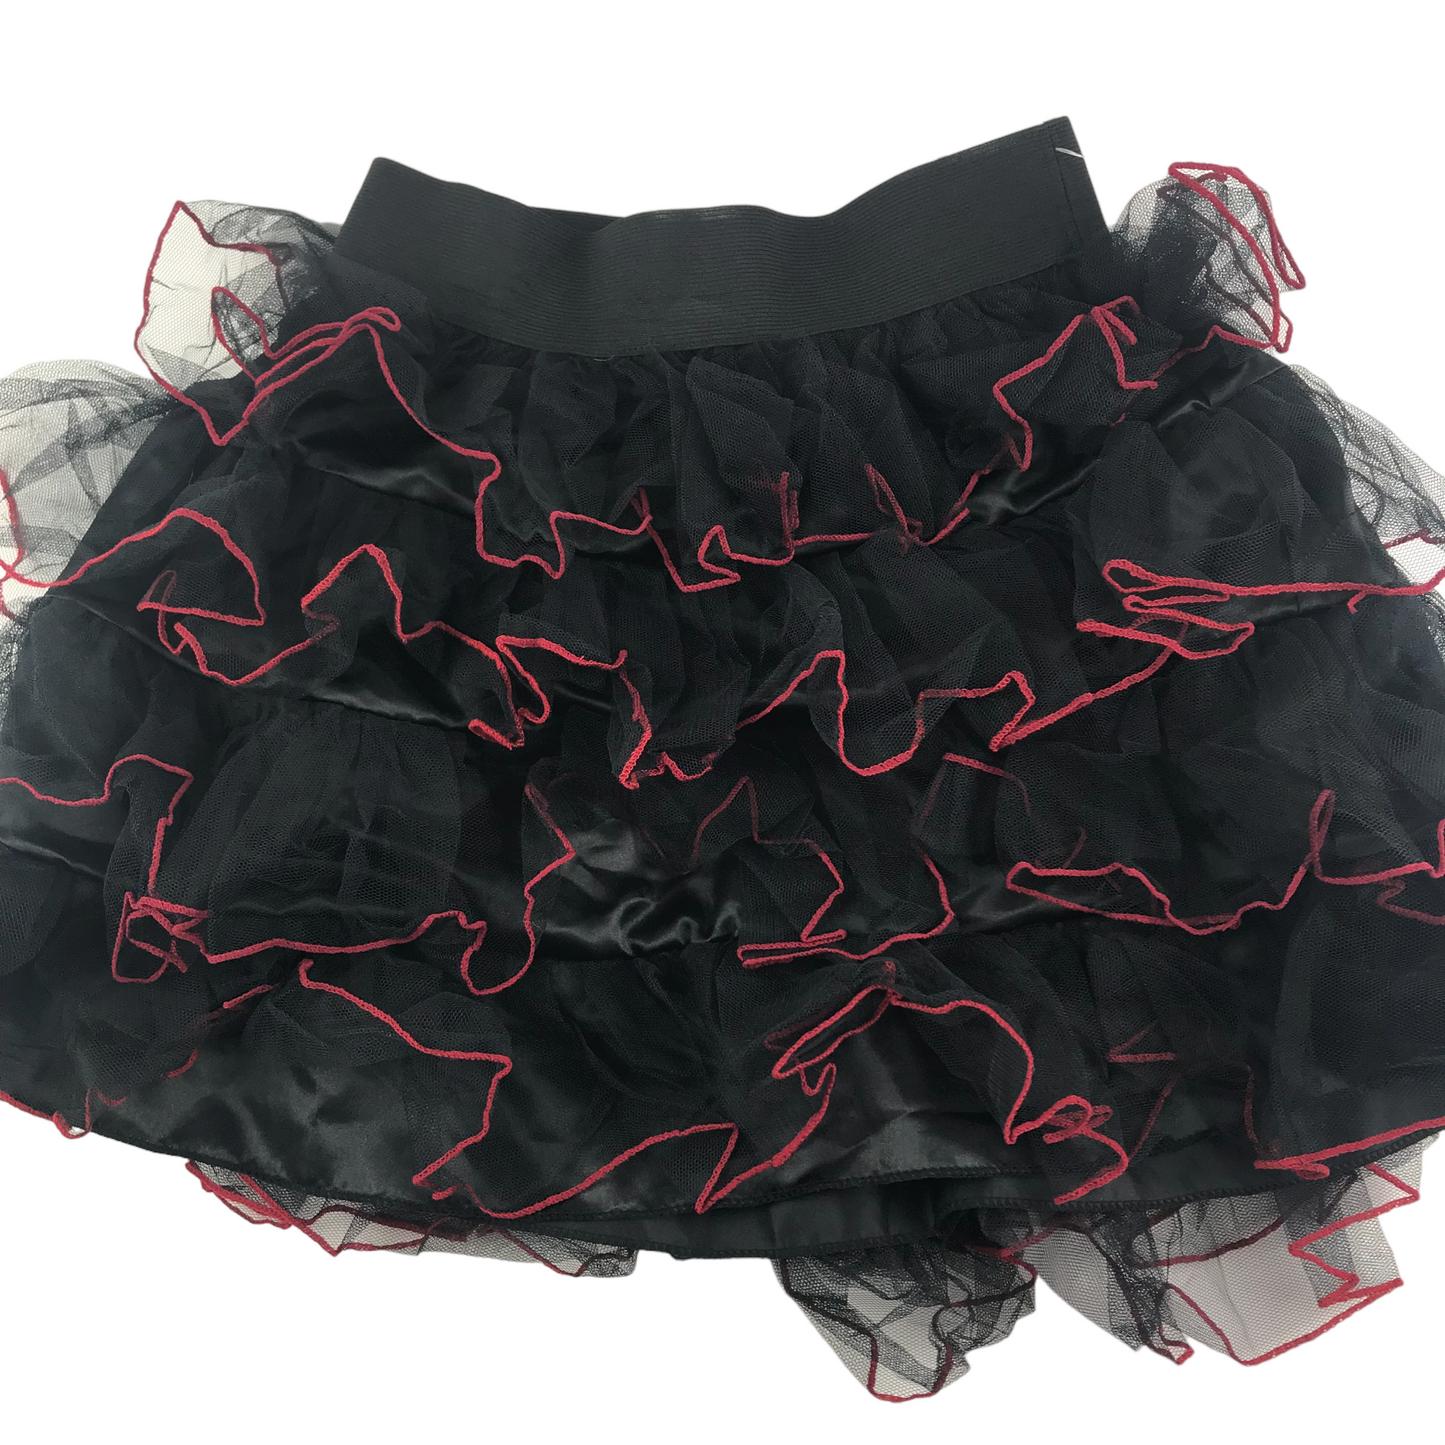 ApparelXchange CIC I Want To Be Parade Marching Band Costume Age 7-8 Red Black Skirt and Jacket Set